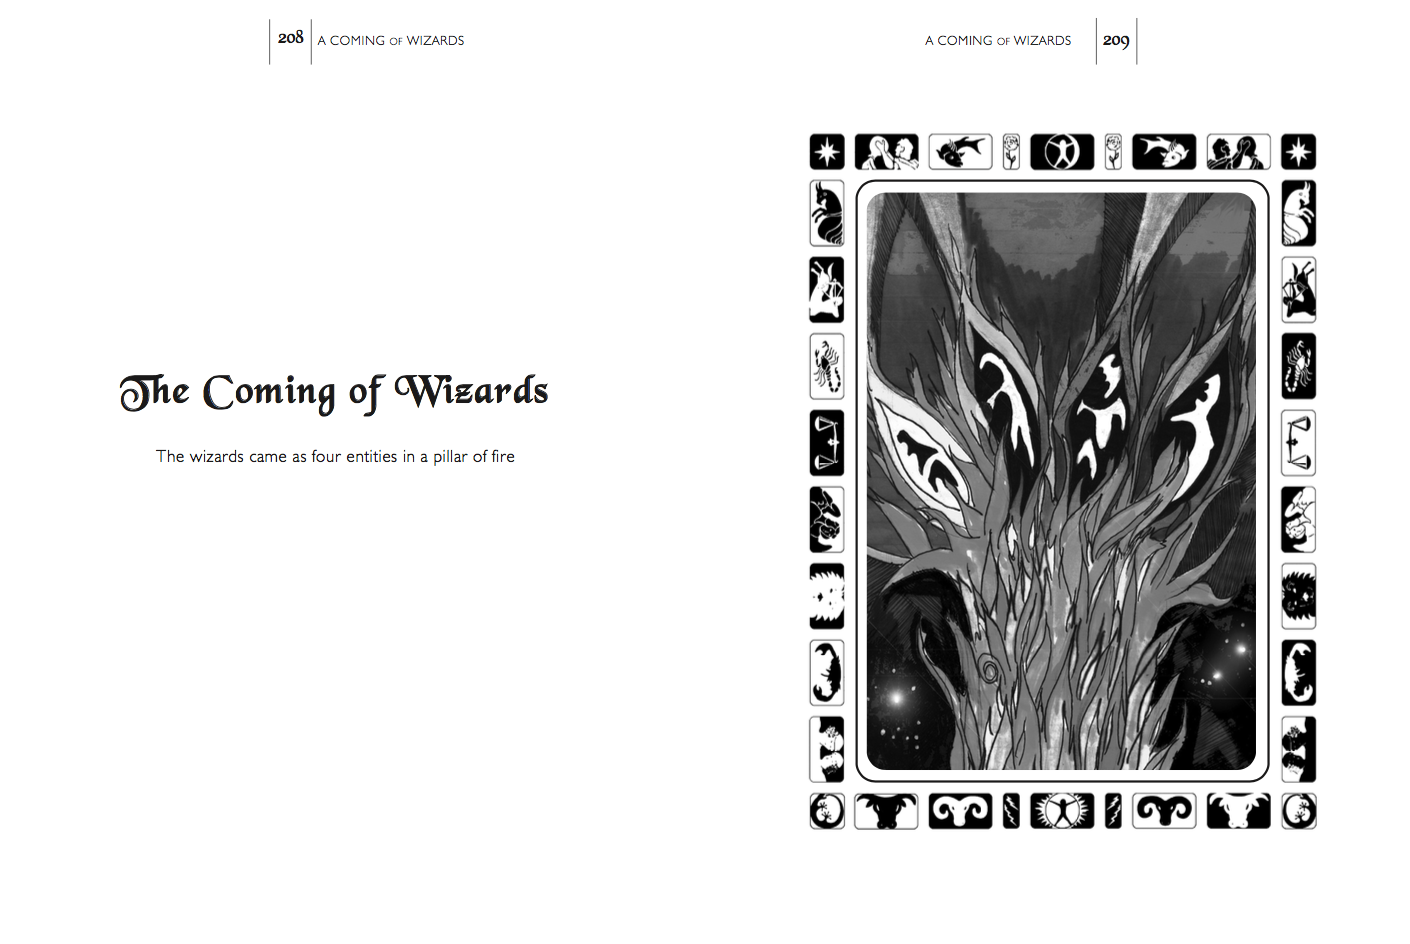 A Coming of Wizards - Paperback